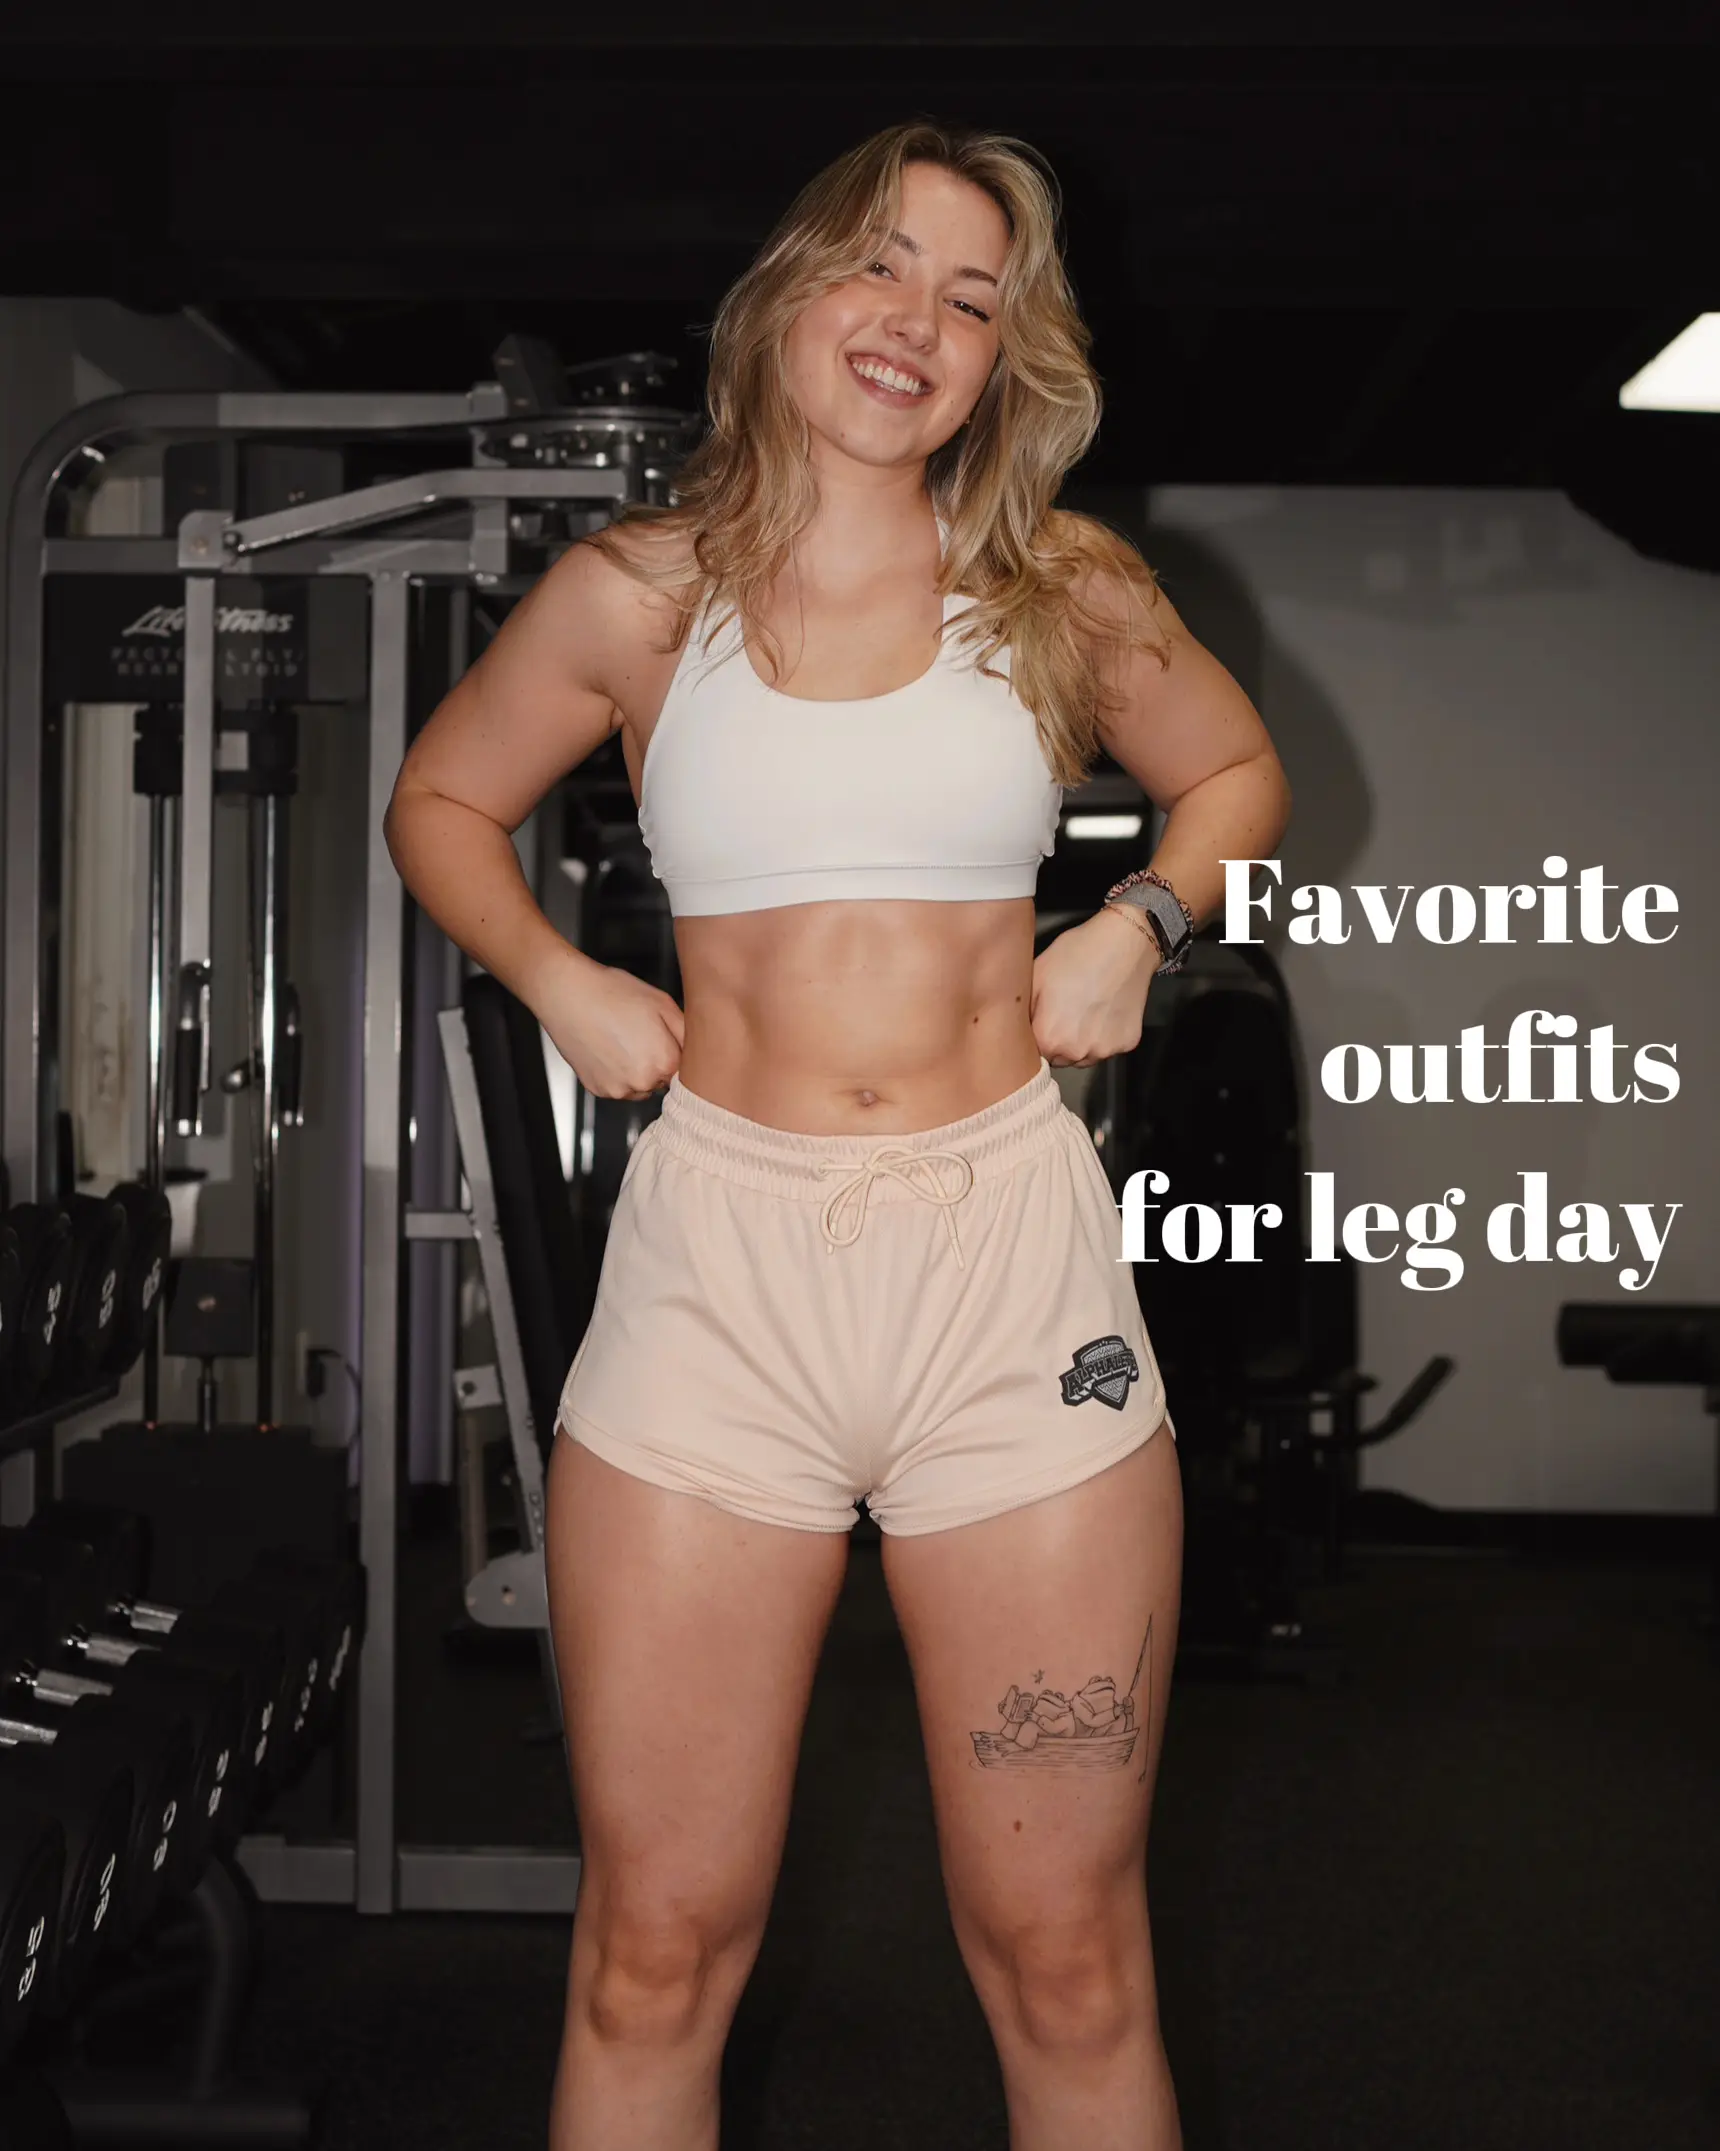 Things needed for leg day 🏋🏽‍♀️, Gallery posted by Court_ofJasmine